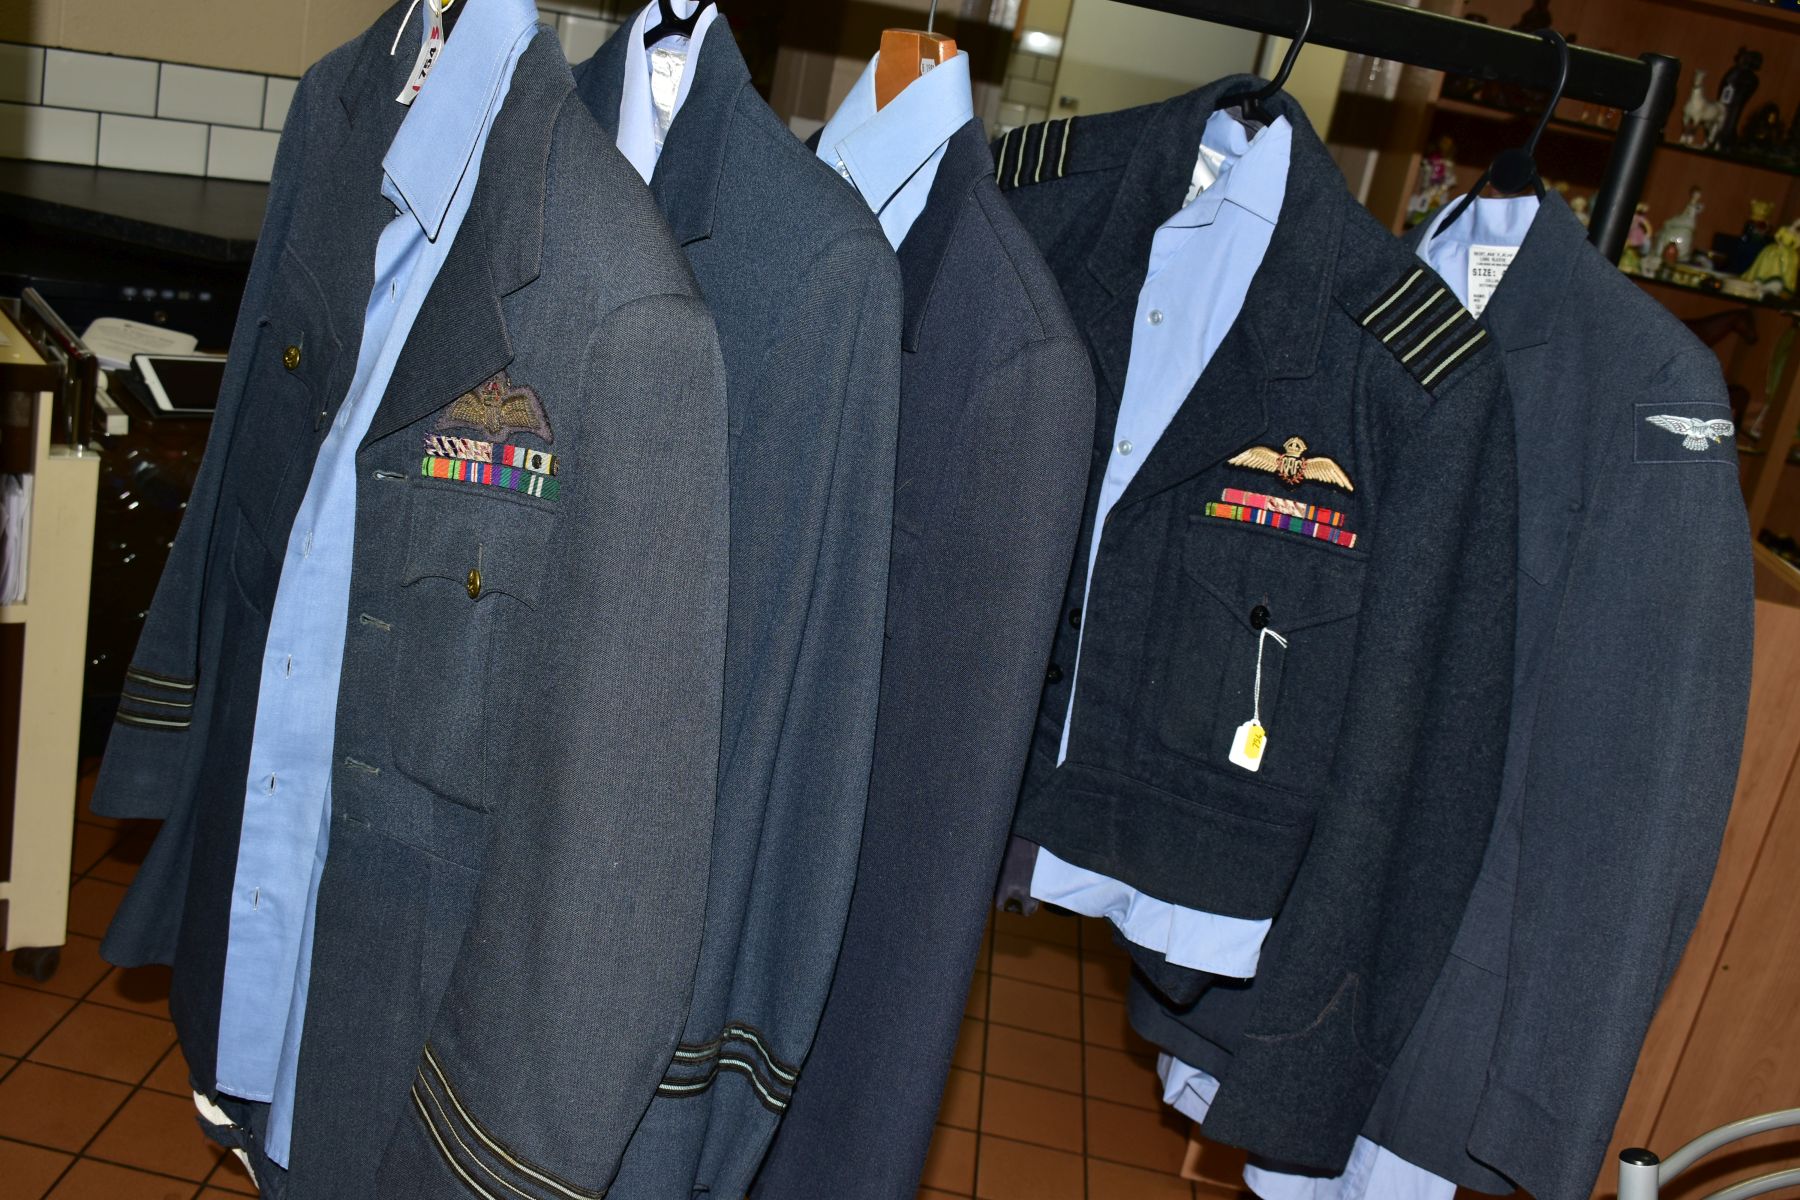 FIVE RAF UNIFORM JACKETS, TROUSERS AND SHIRTS/CAPS, mainly WWII/post WWII era, some with insignia/